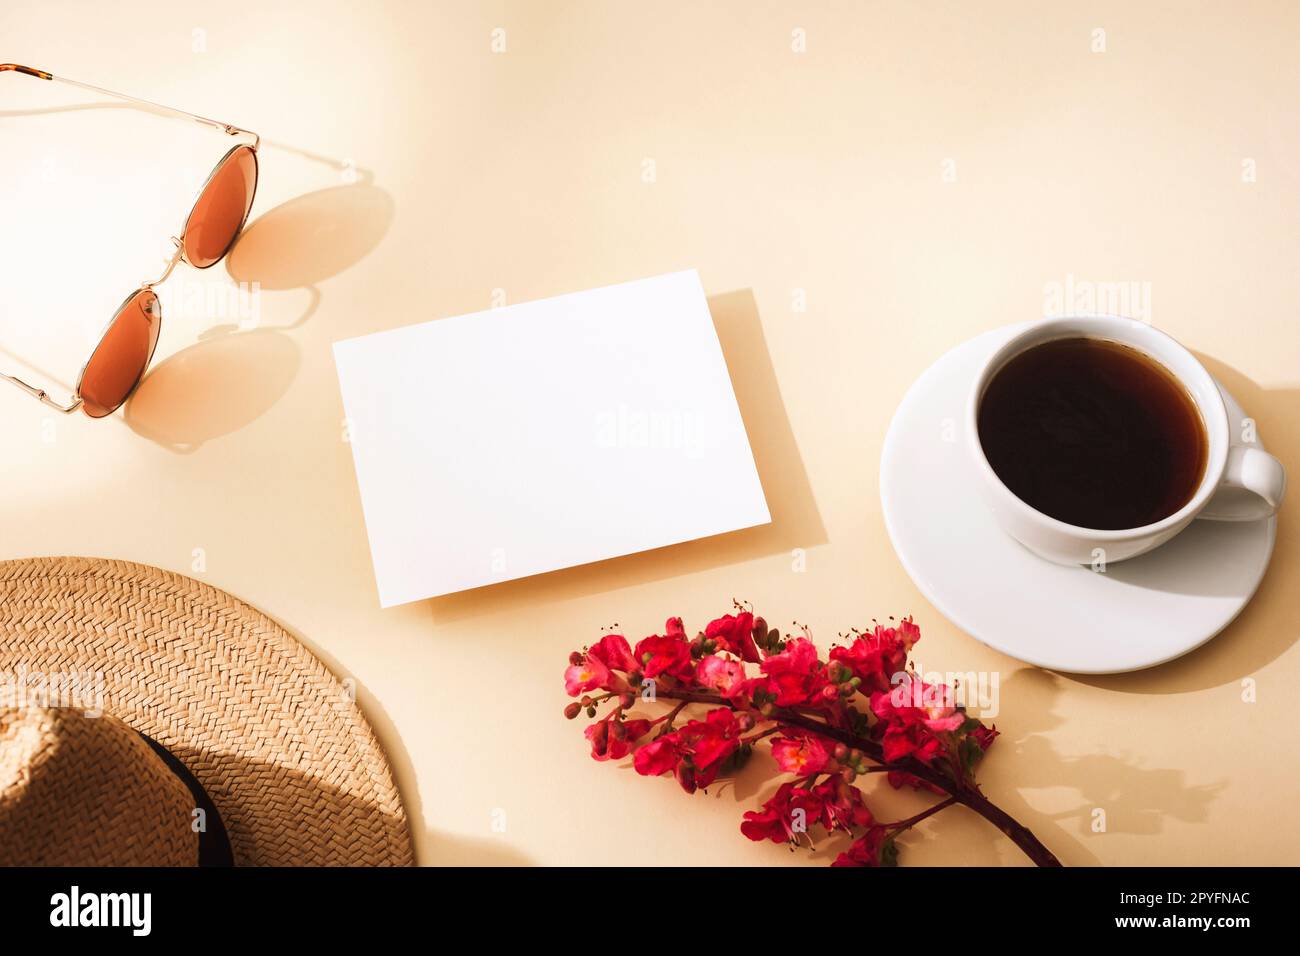 Blank card, coffee cup, straw hat, sunglasses and flower. Top view, flat lay Mockup Stock Photo